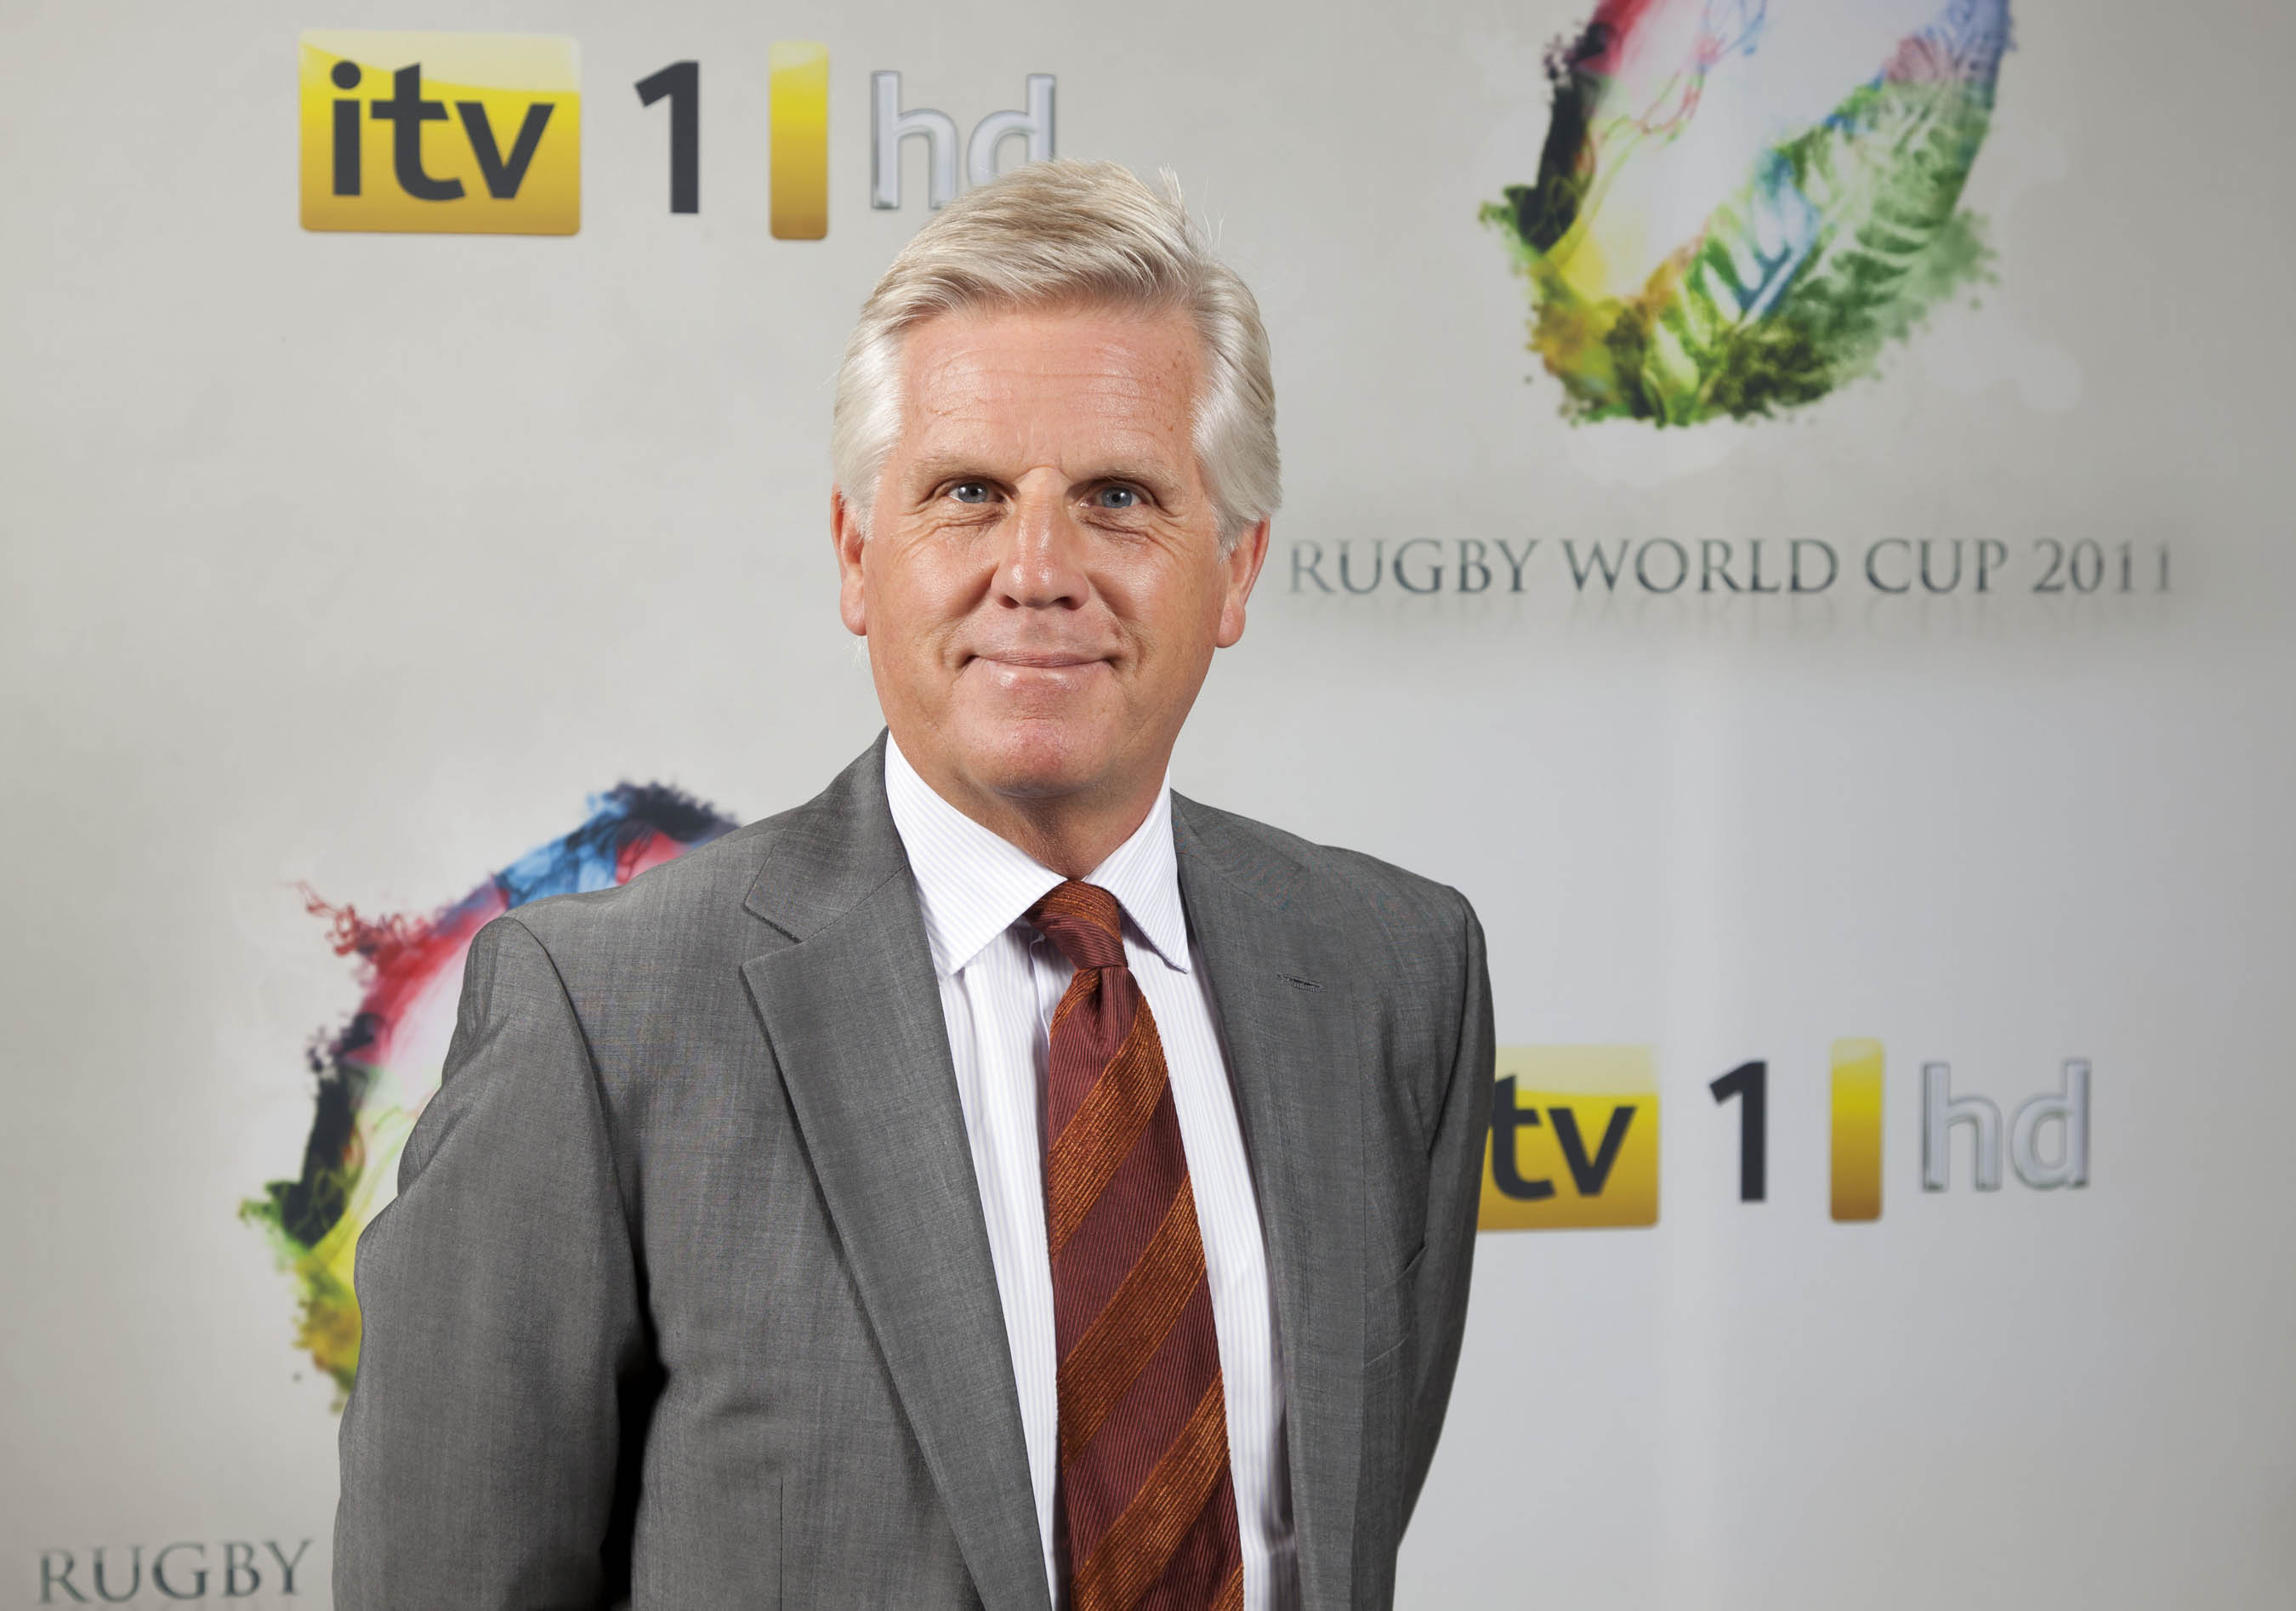 RUGBY UNION Rugby World Cup 2011 on ITV